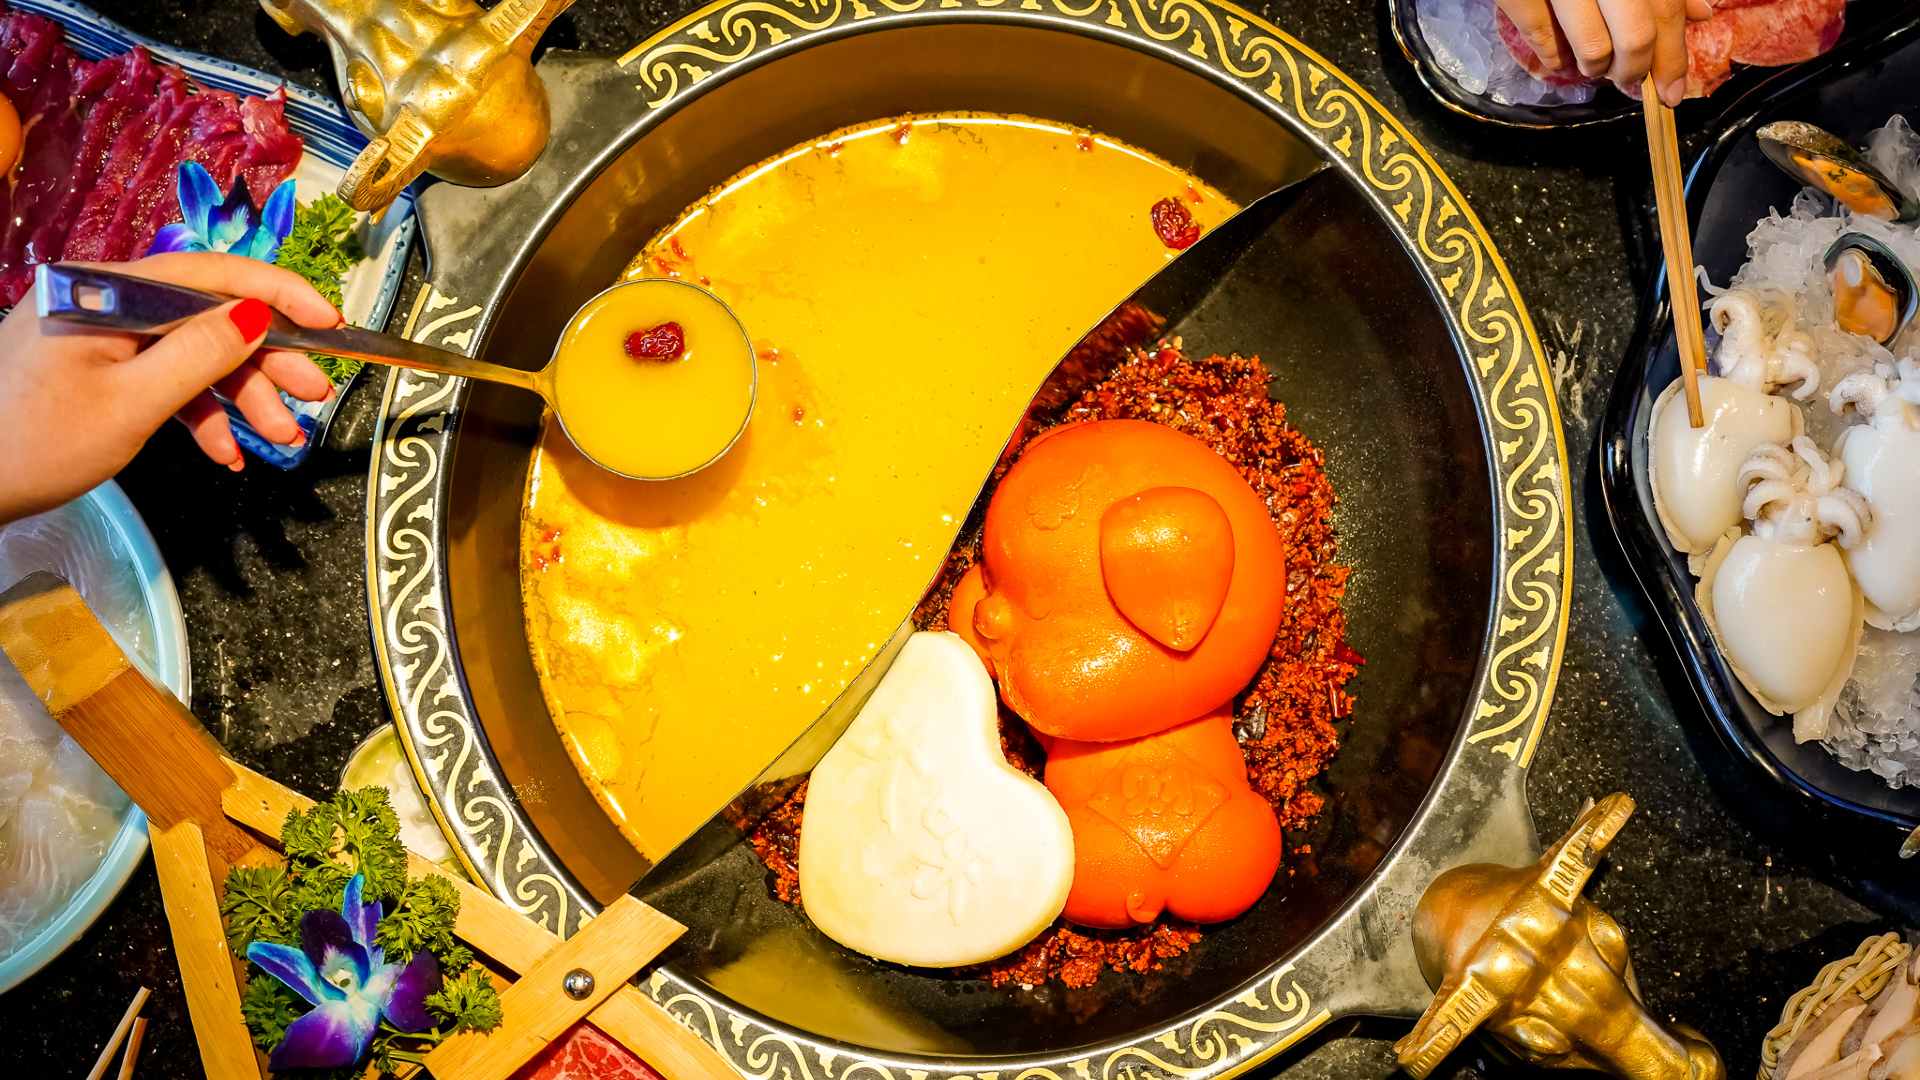 the view of a hotpot from above at David's Hotpot - one of the best restaurants in Melbourne